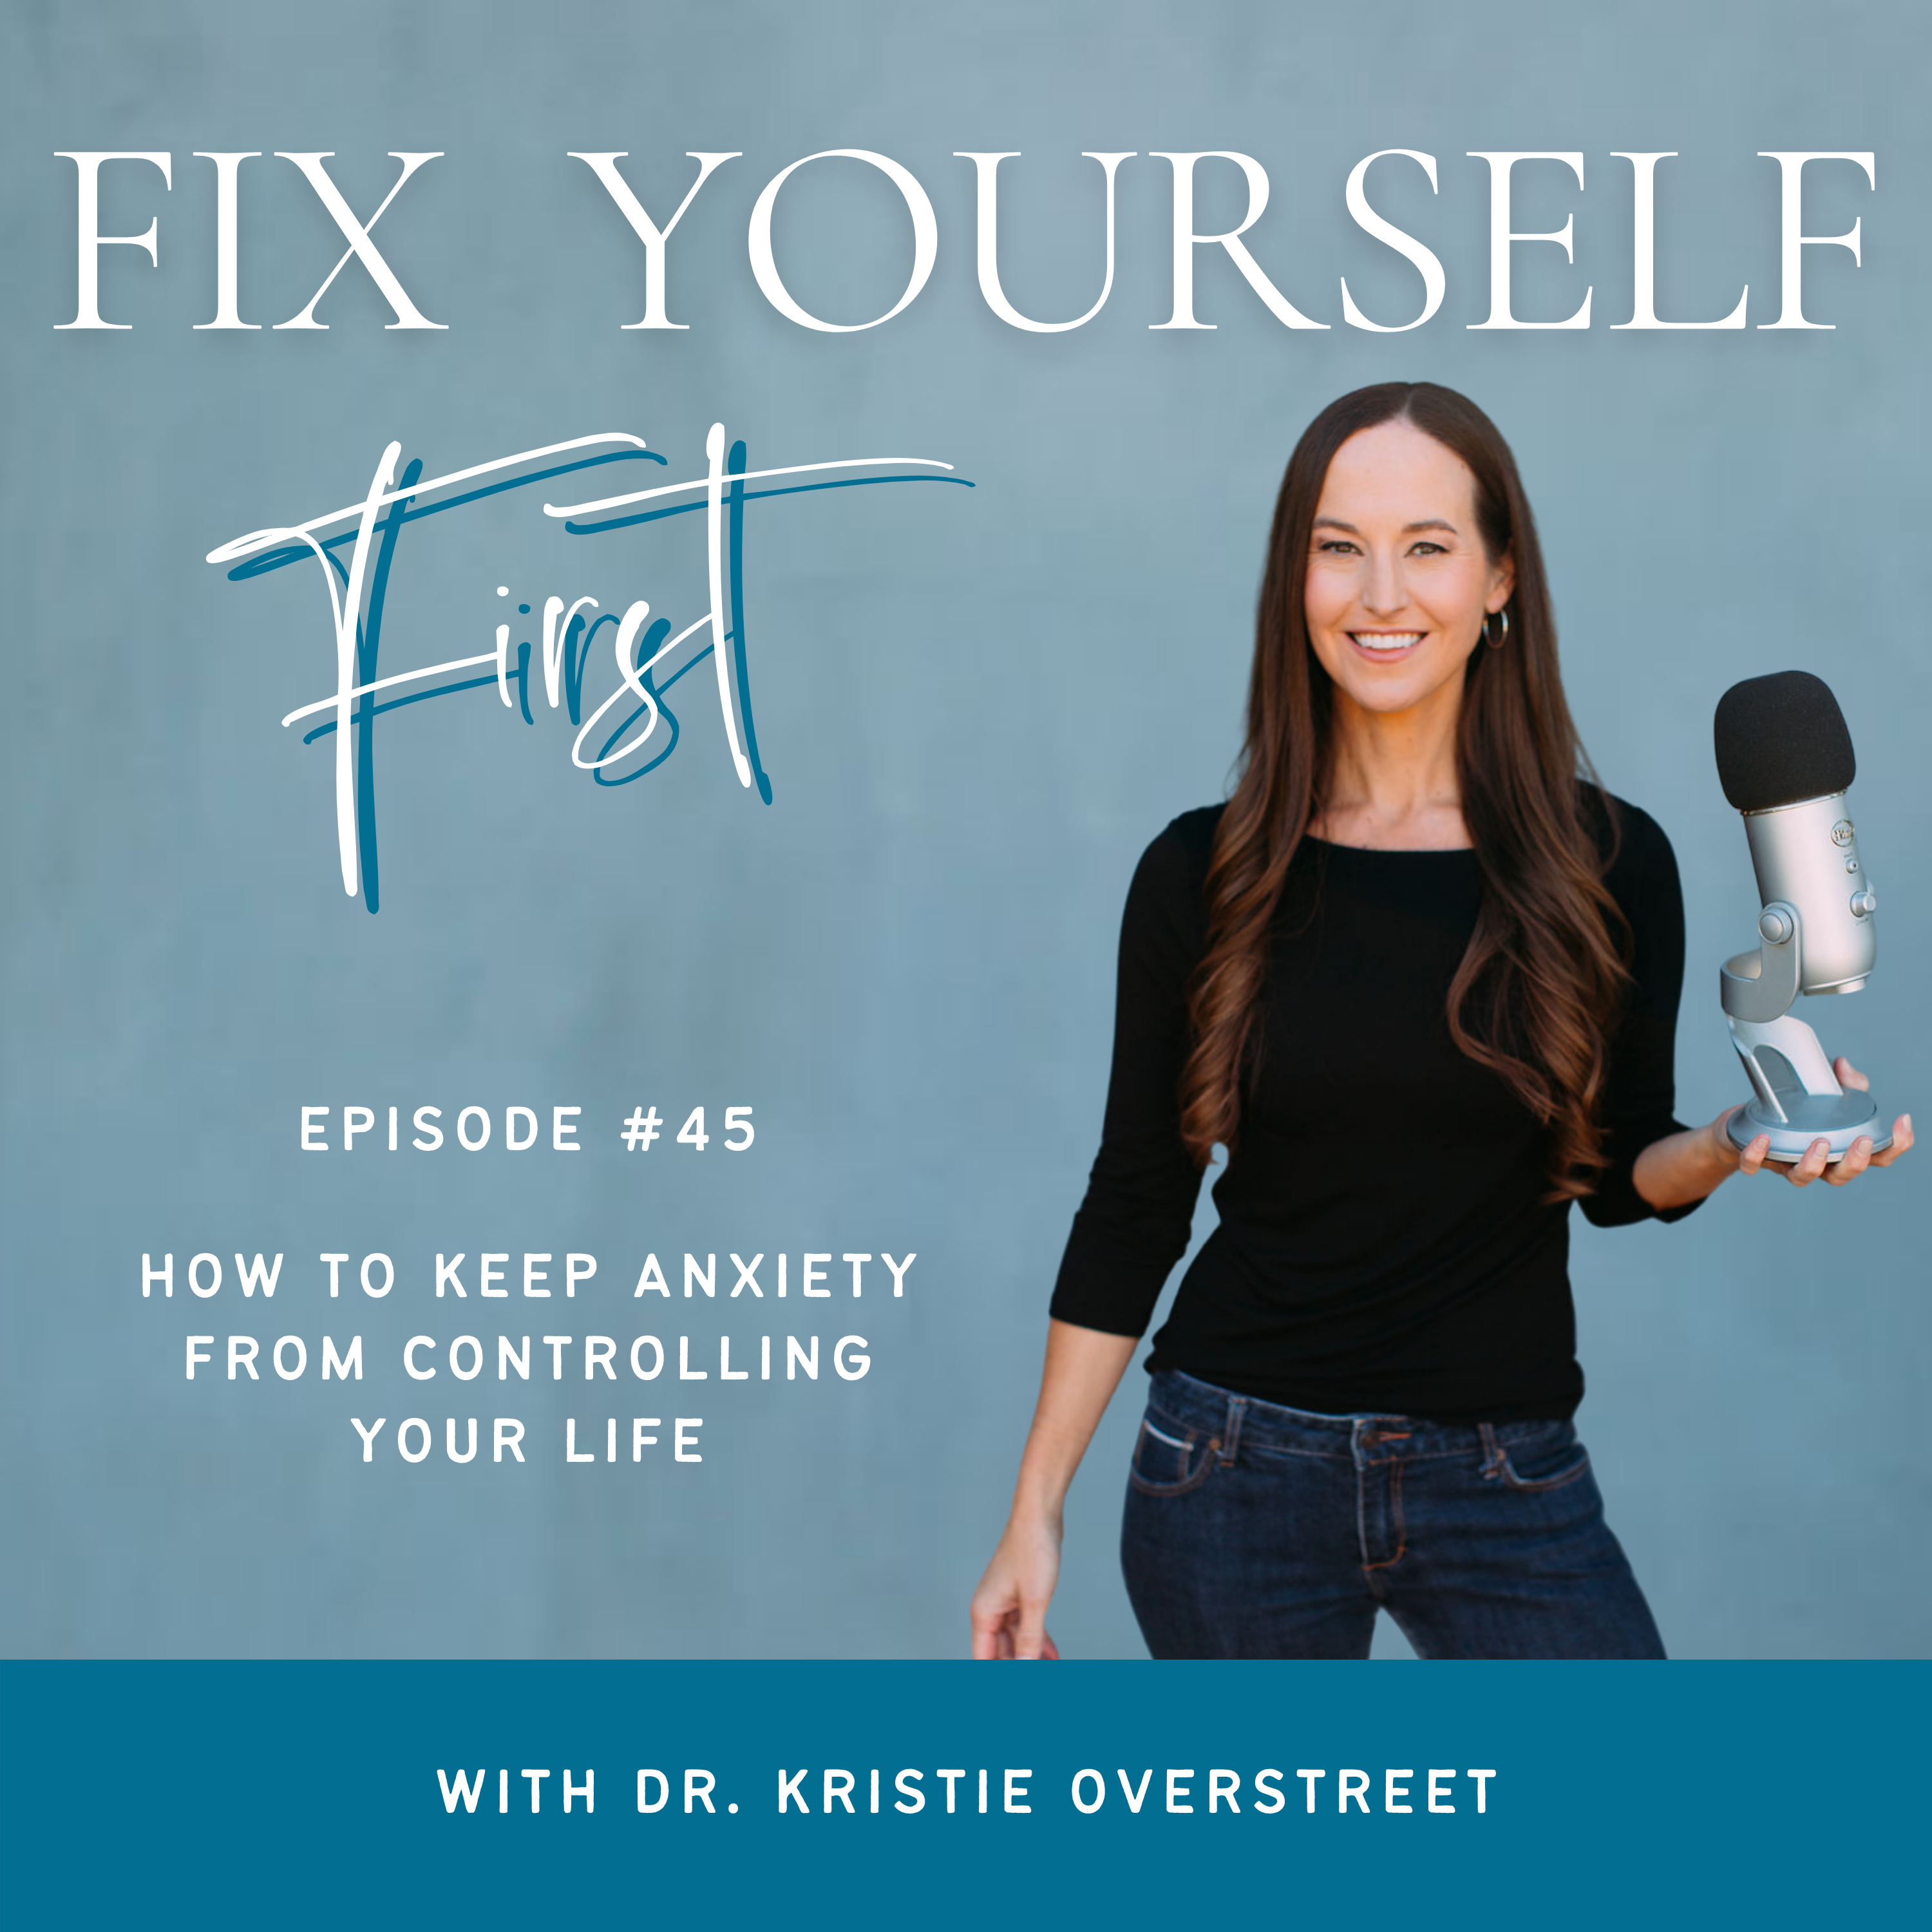 Fix Yourself First - Episode 45